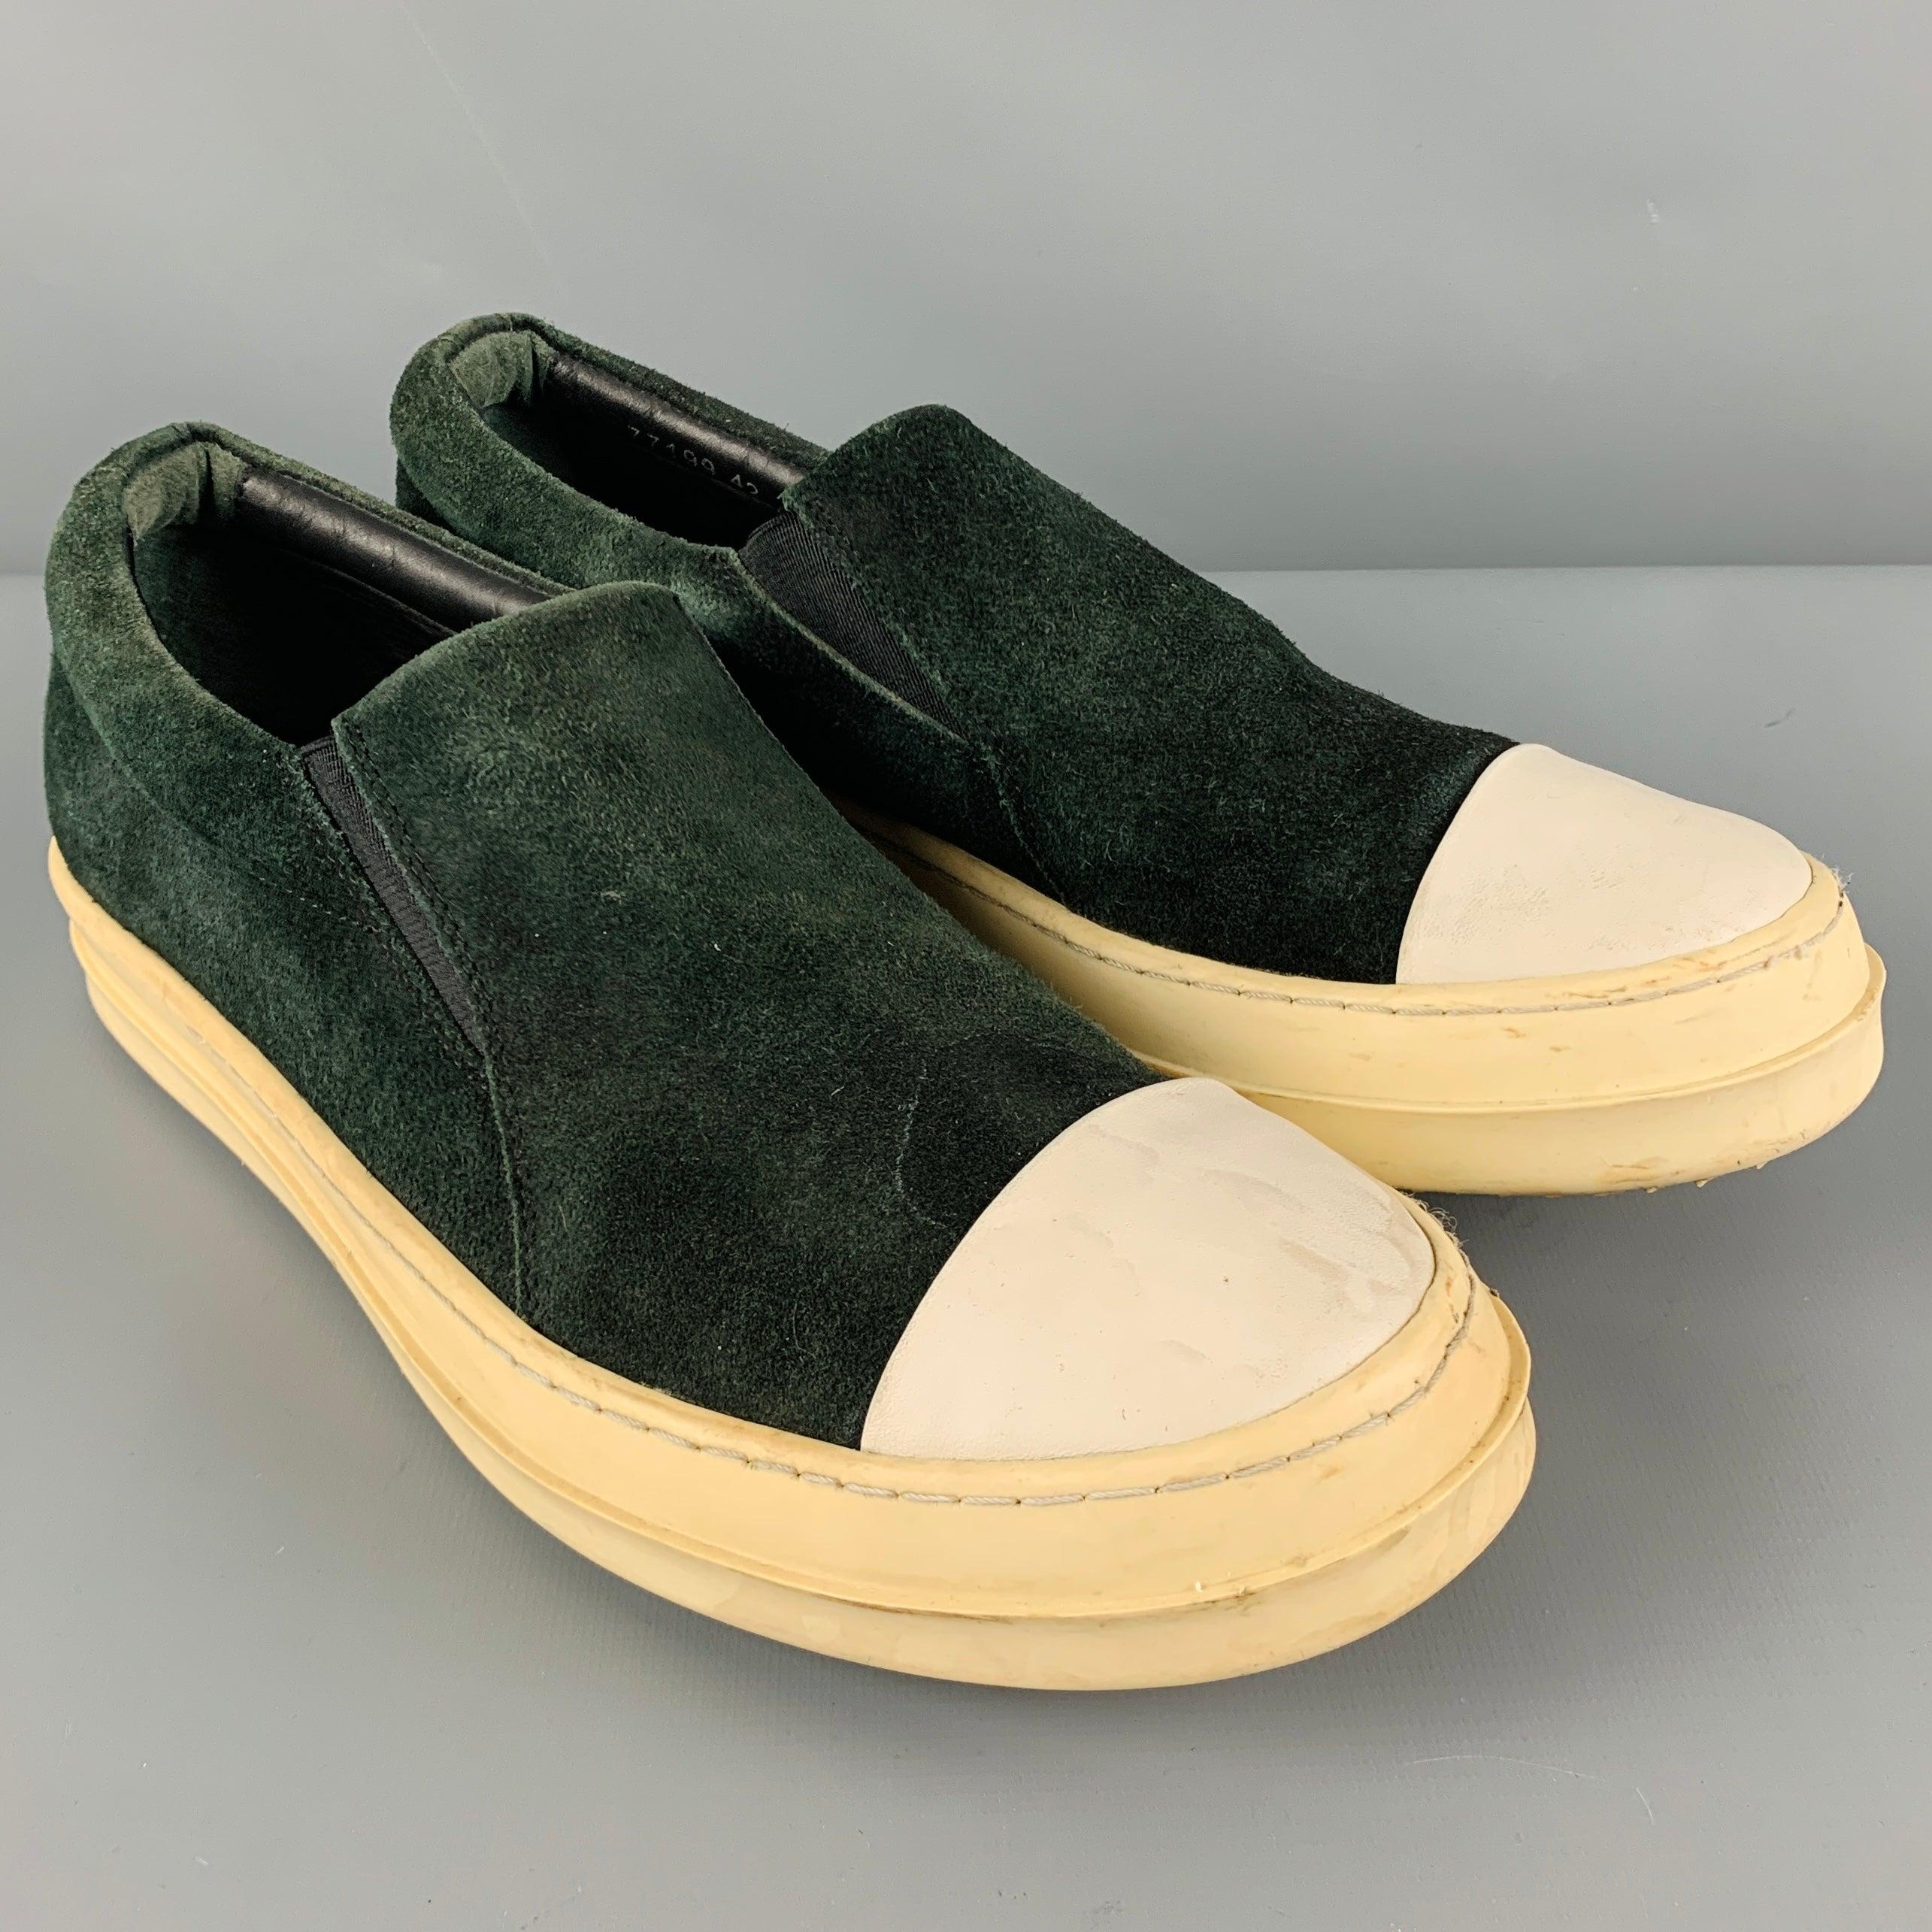 RICK OWENS sneakers
in a green suede leather fabric featuring a slip on style and white rubber sole. Made in Italy.Good Pre-Owned Condition. Moderate signs of wear and marks, as is. Please check photos. 

Marked:   77199 42Outsole: 11 inches  x 4